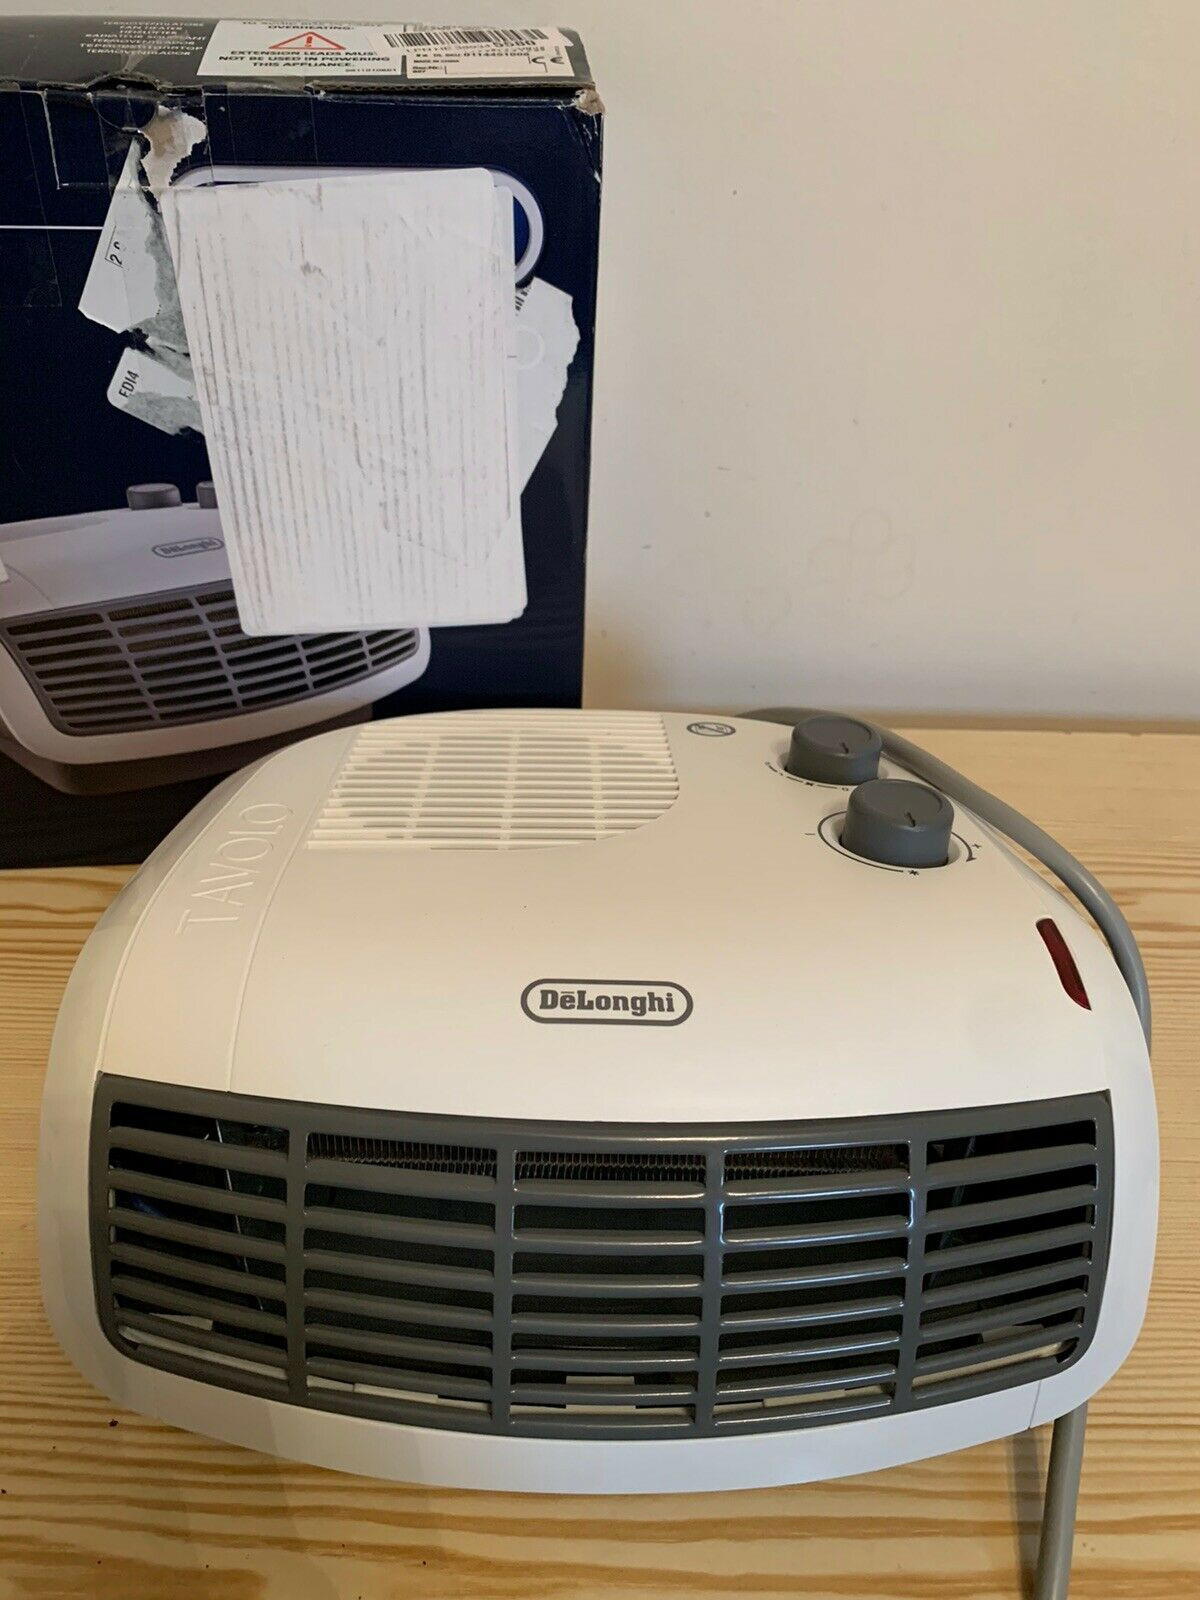 Delonghi Htf 3033 Electric Compact Heater pertaining to dimensions 1200 X 1600